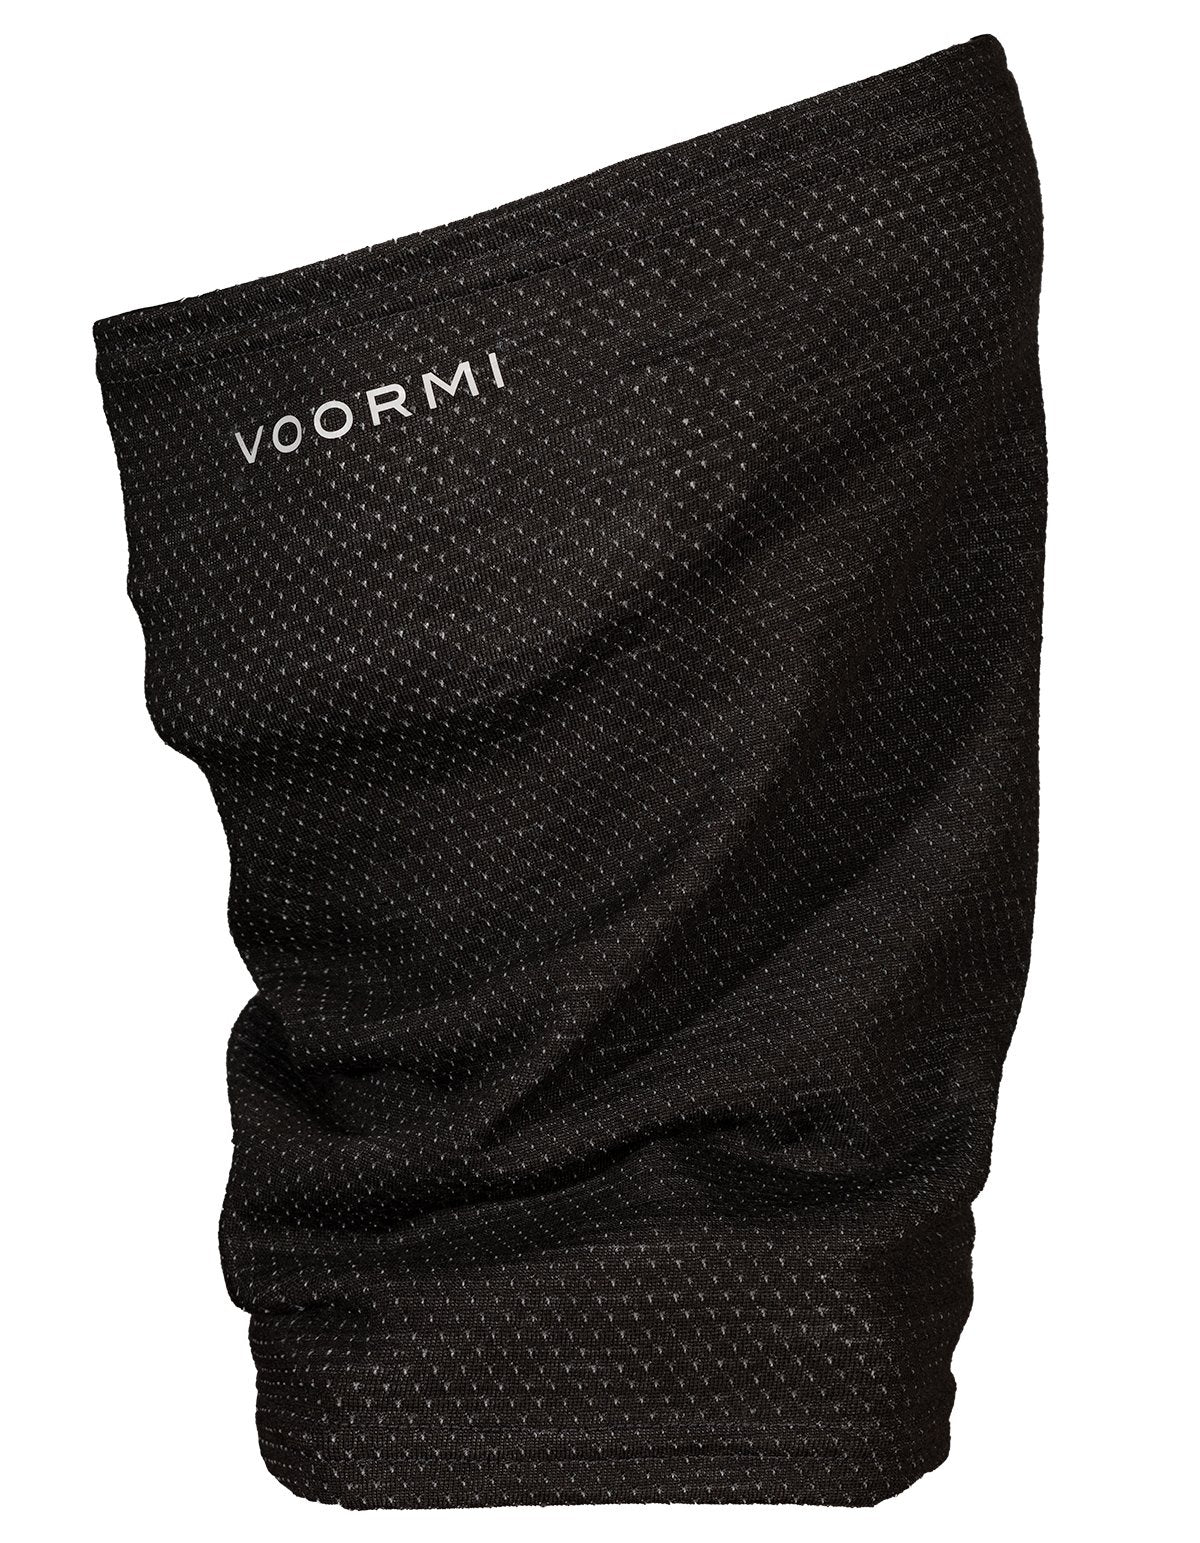 PRECISION BLENDED GAITER (WOOL) by VOORMI